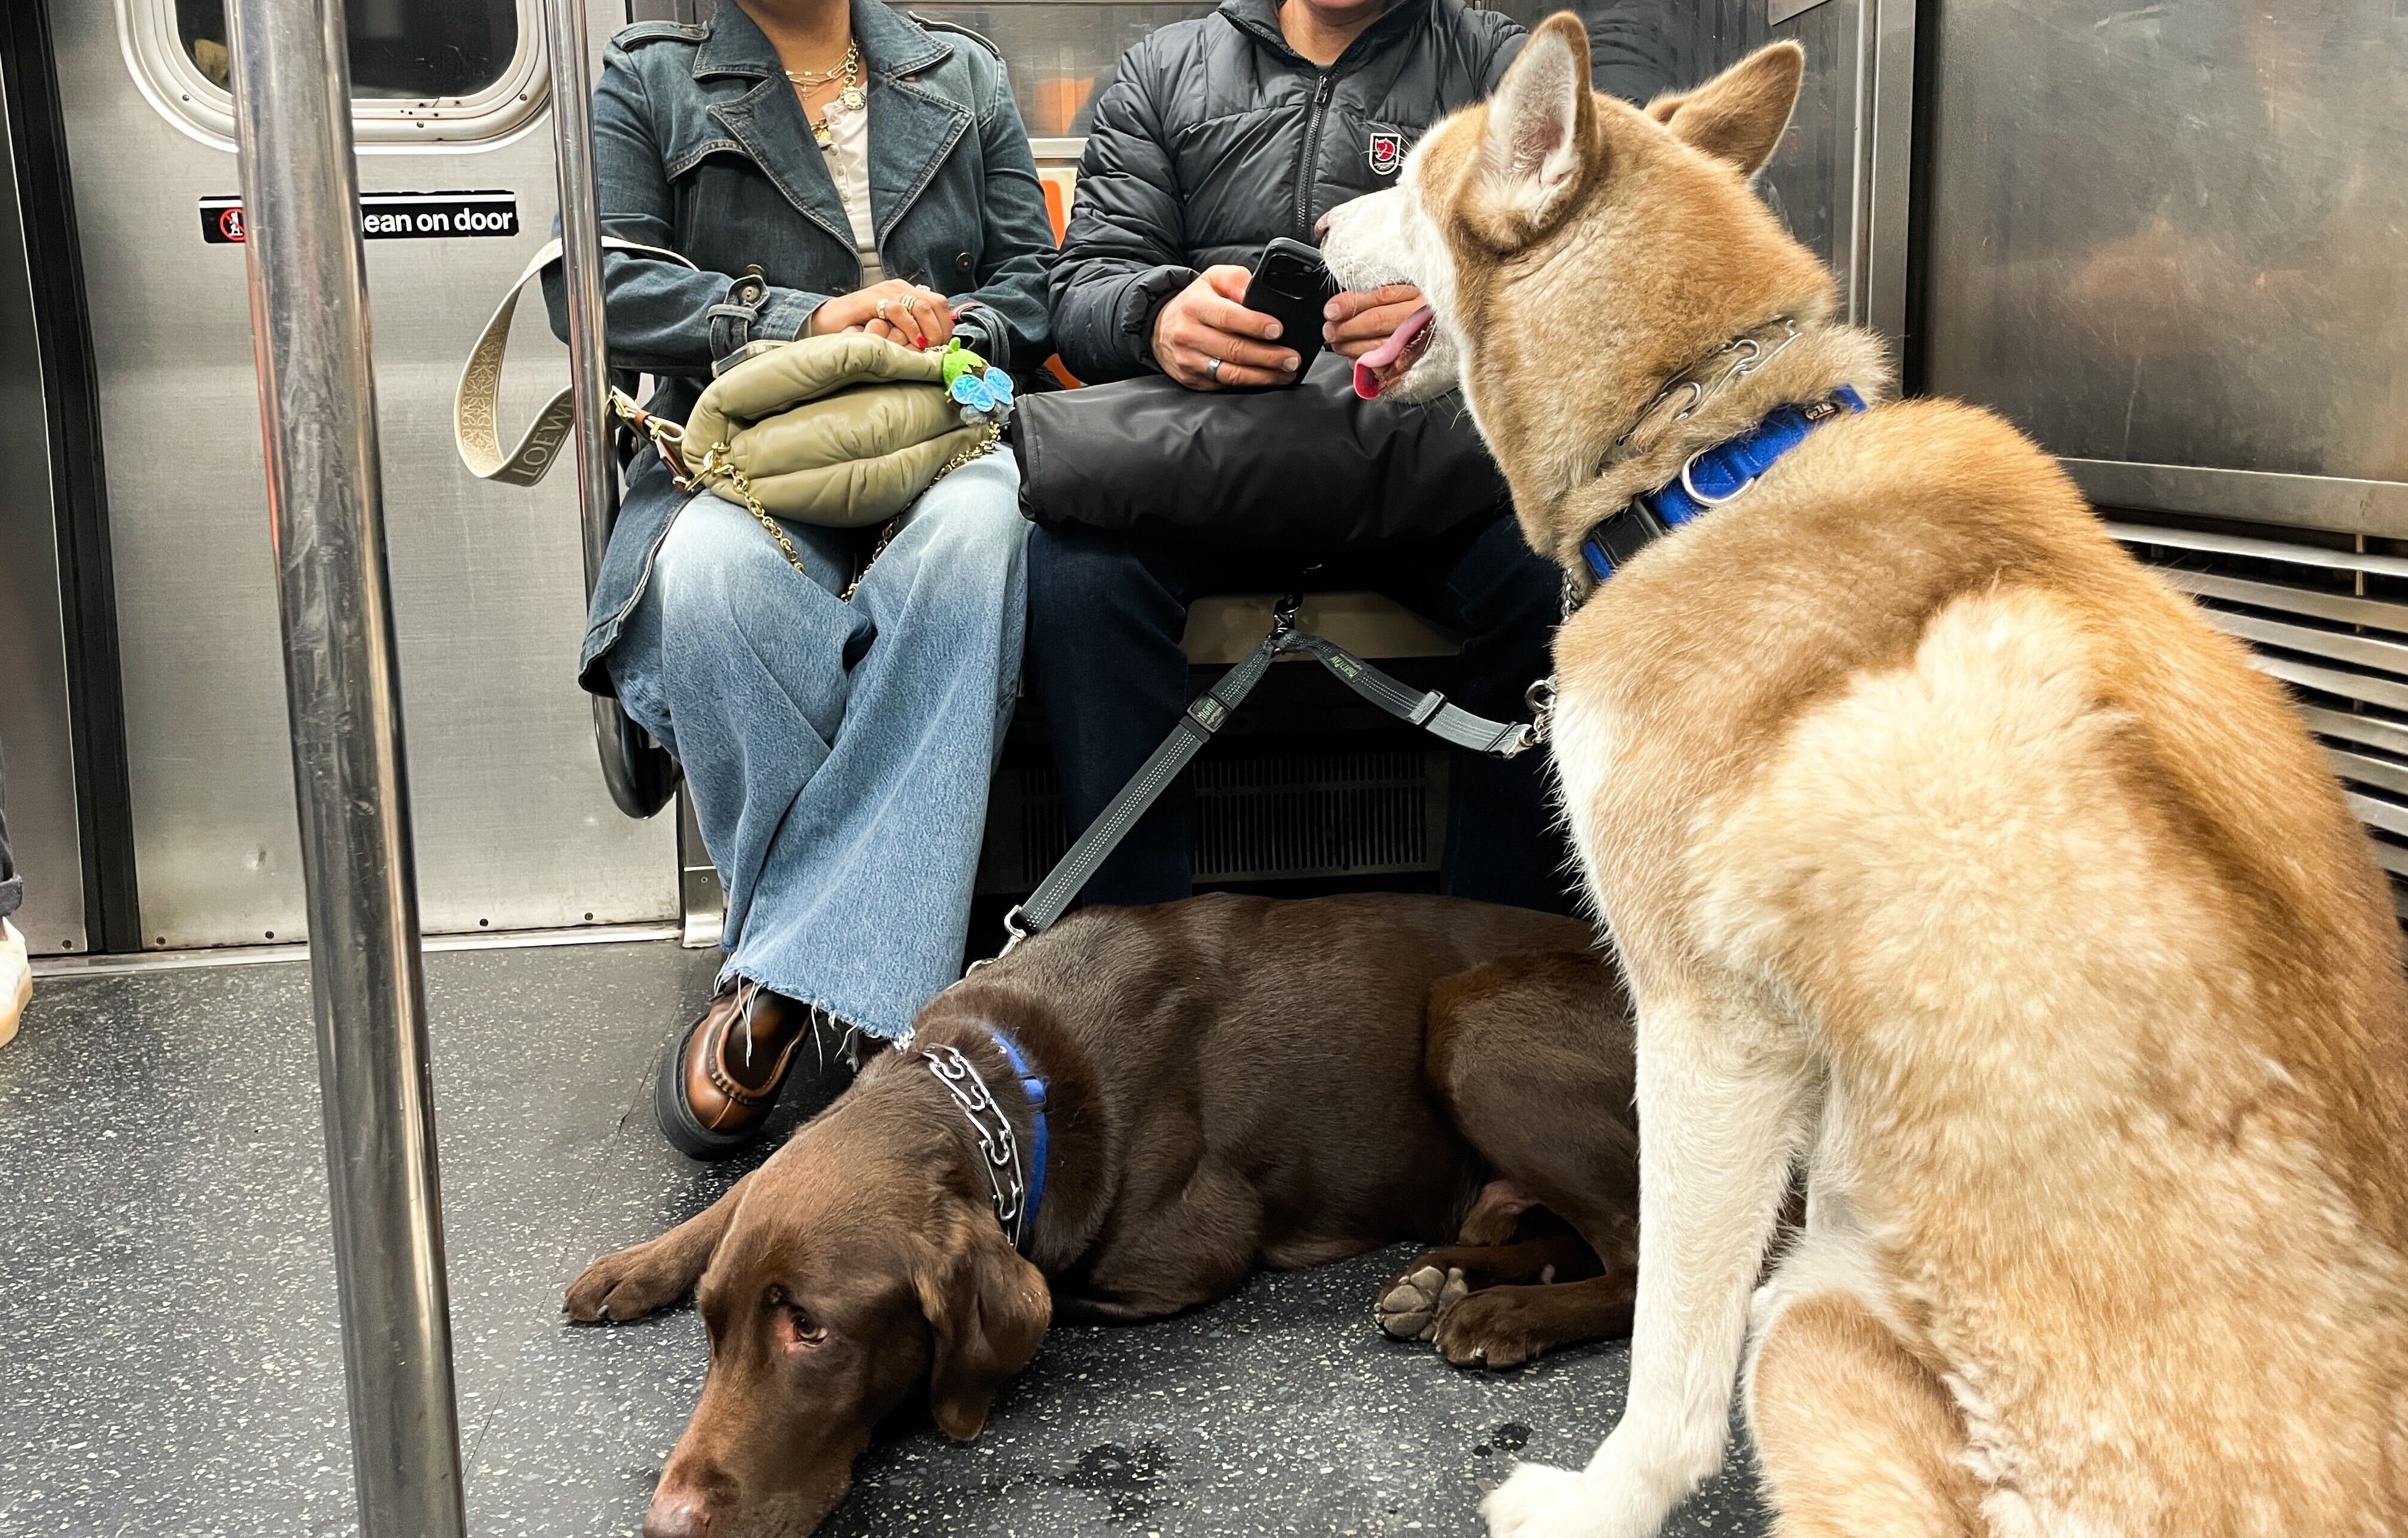 Two large dogs sit on a New York City subway car.